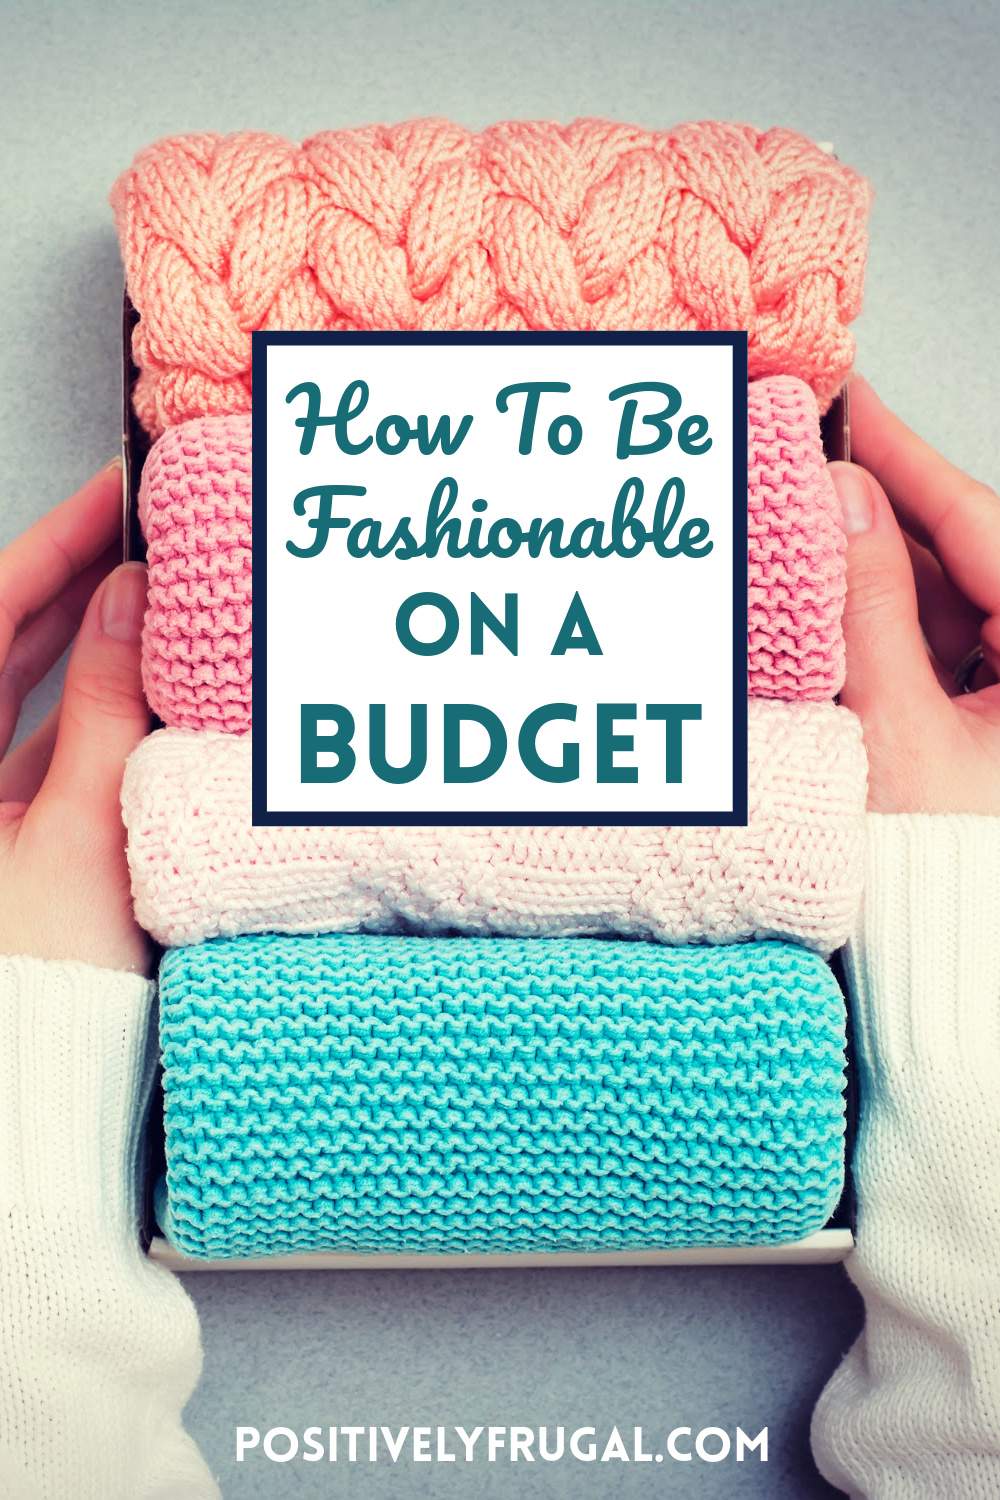 How To Be Fashionable on a Budget by PositivelyFrugal.com